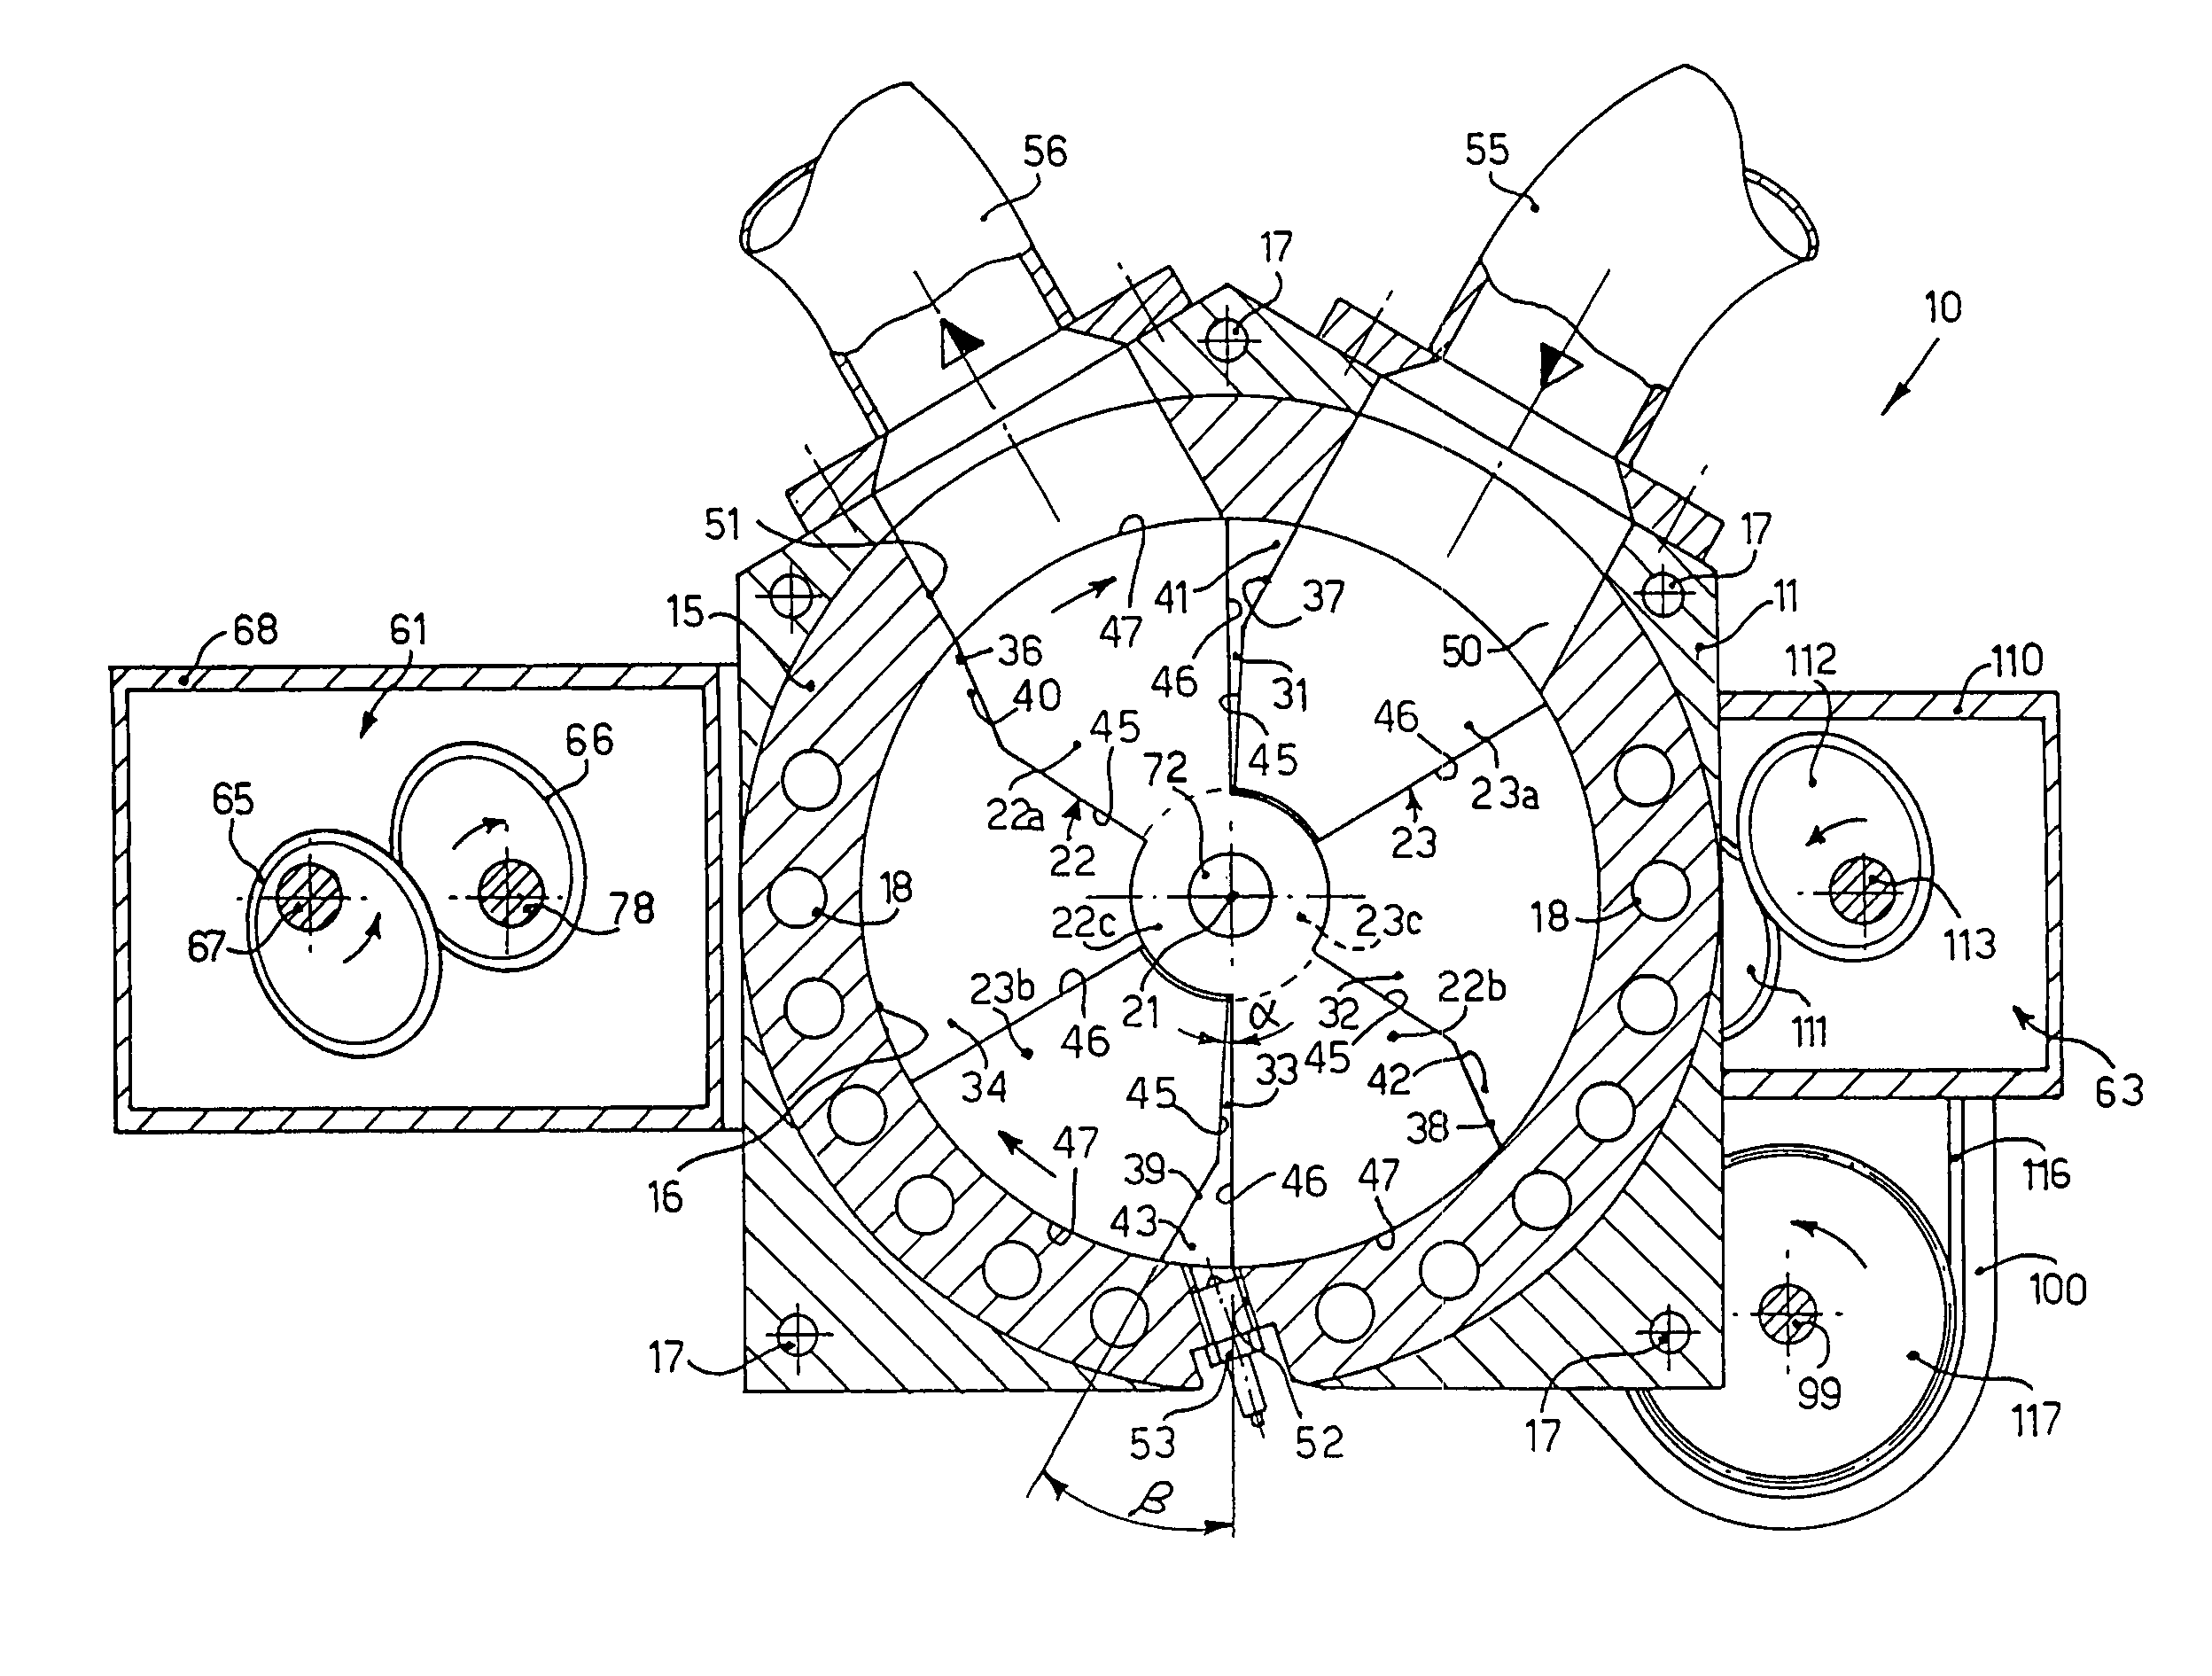 Rotary piston combustion engine